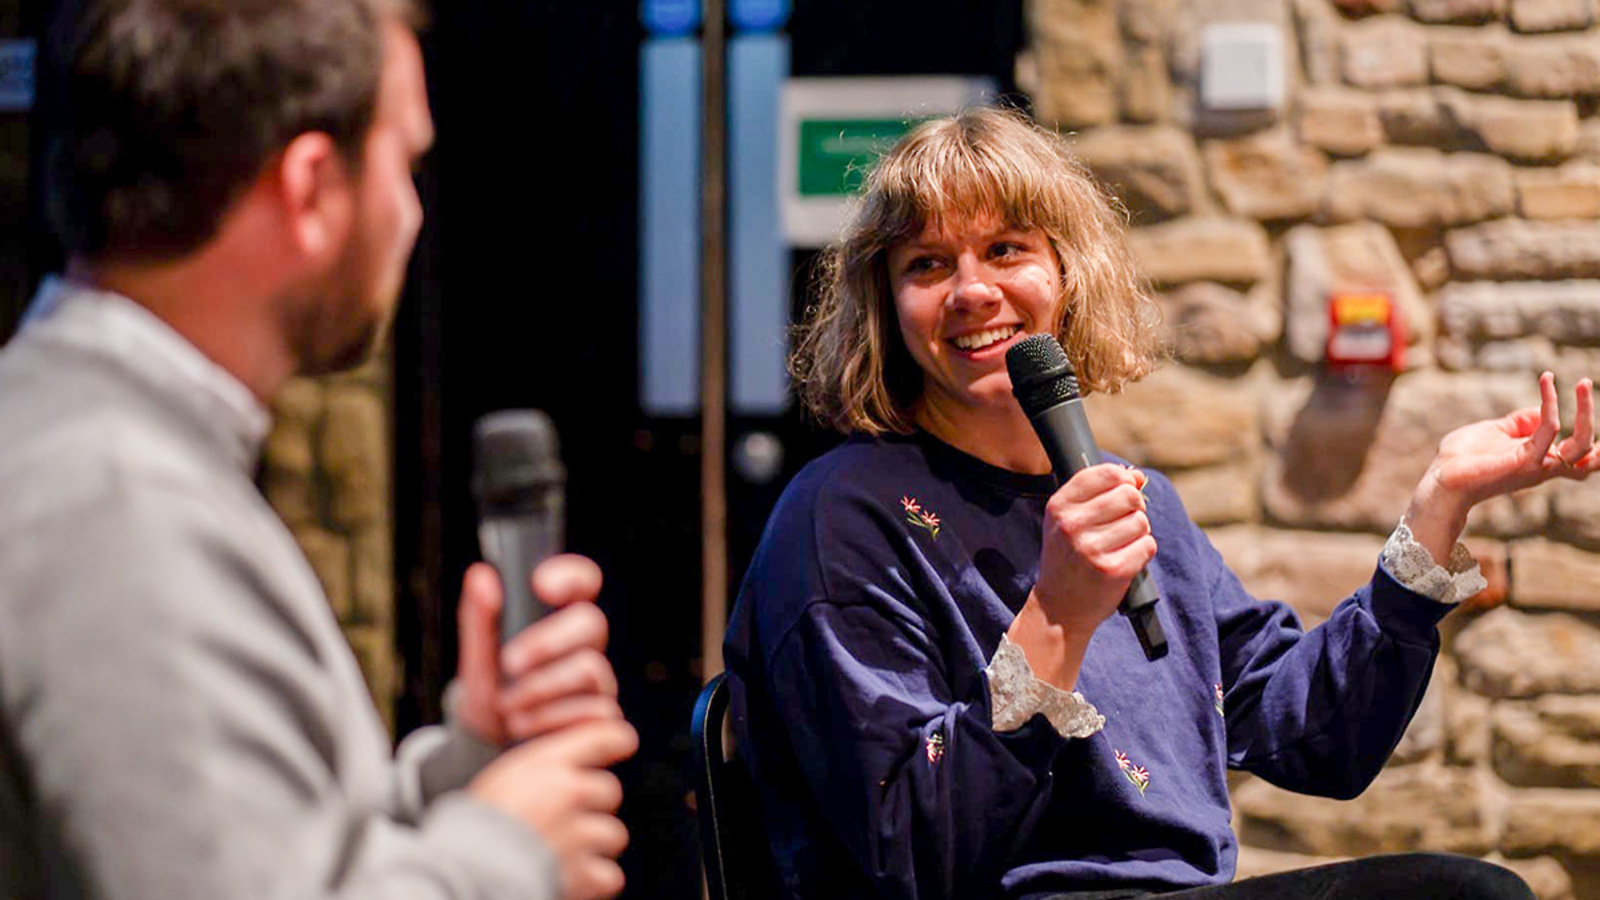 Milda Baginskaitė takes part in a Q&A at a Northern Exposure event in Sunderland